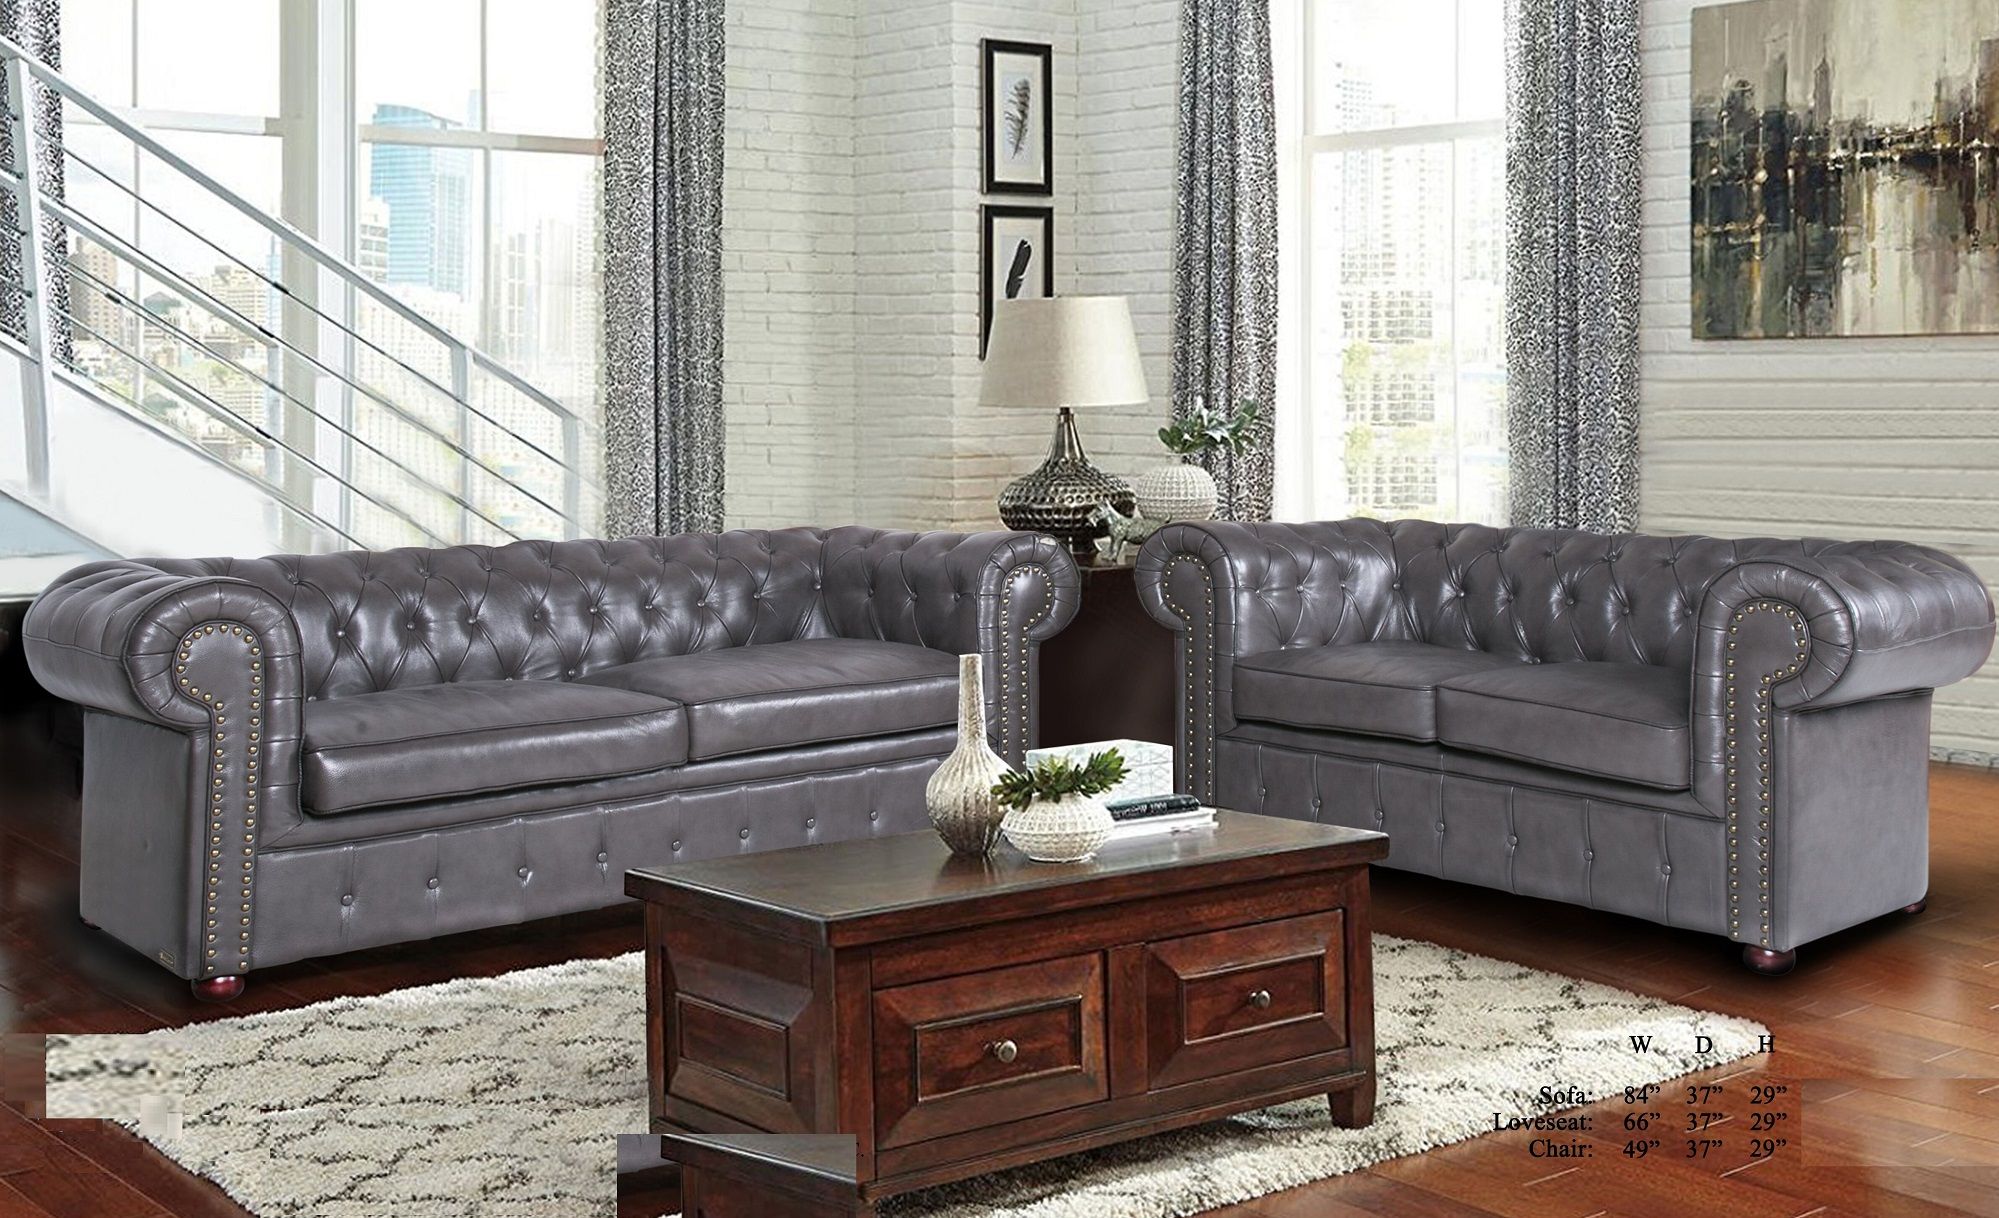 Formal Luxurious Living Room Furniture Gray 2Pc Sofa Set Intended For Living Room Sofa Chairs (View 3 of 15)